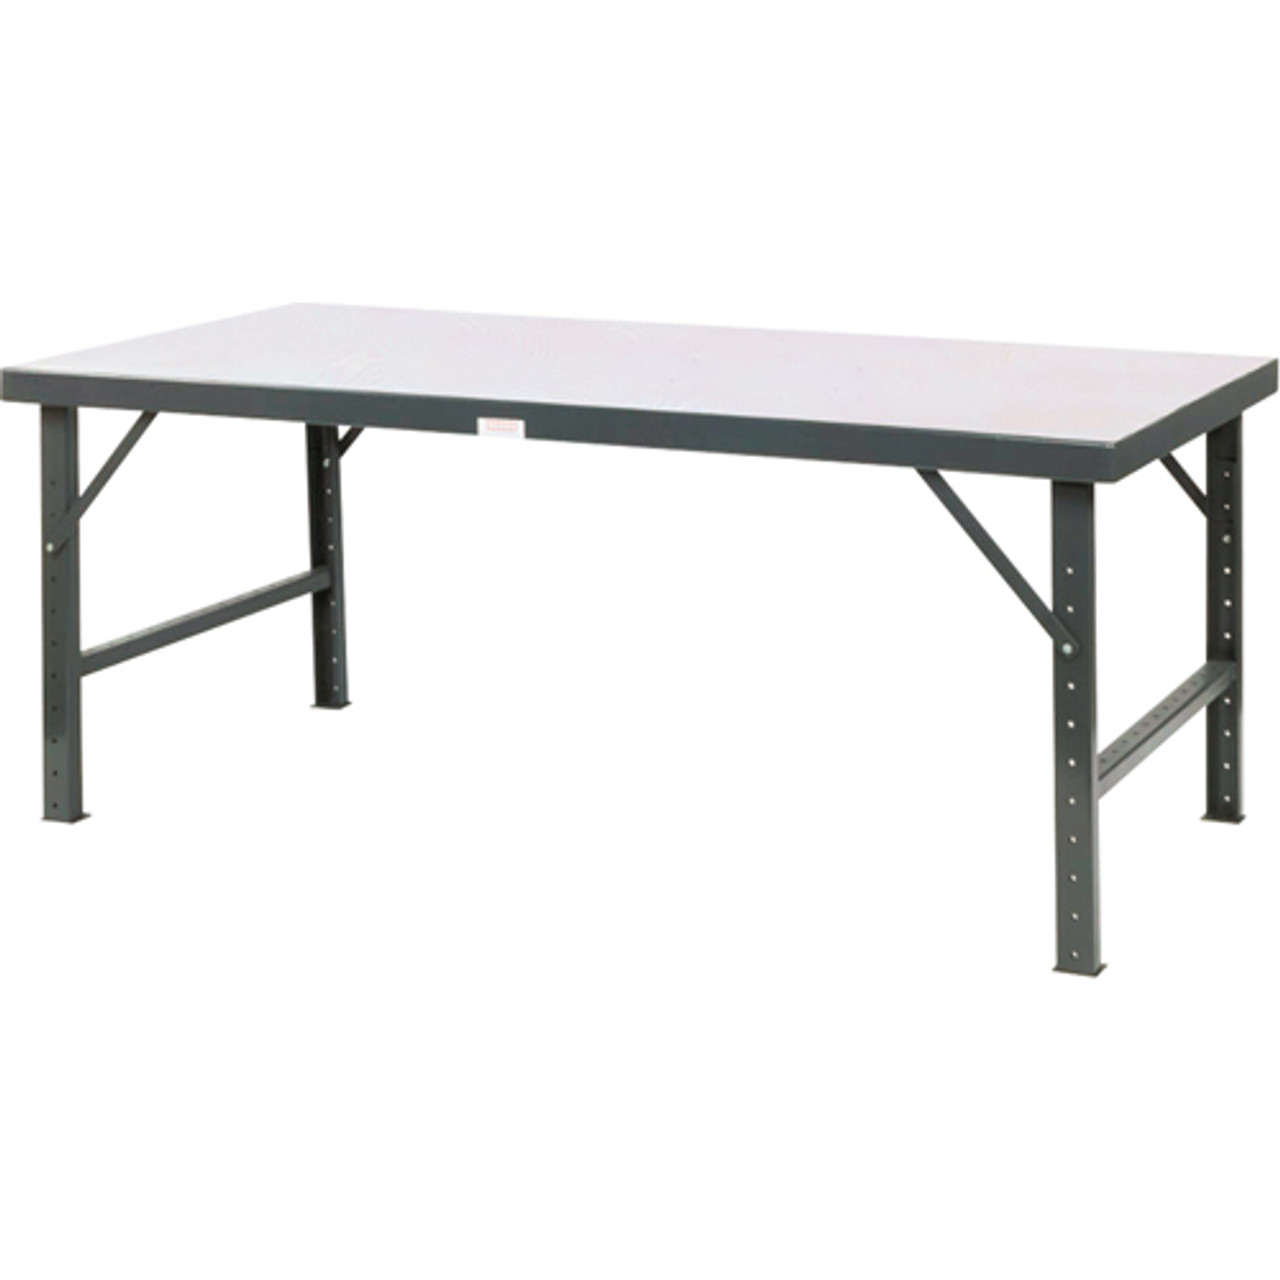 Valley Craft Work Table 48"Wx84"L steel top (CALL FOR BEST PRICING)